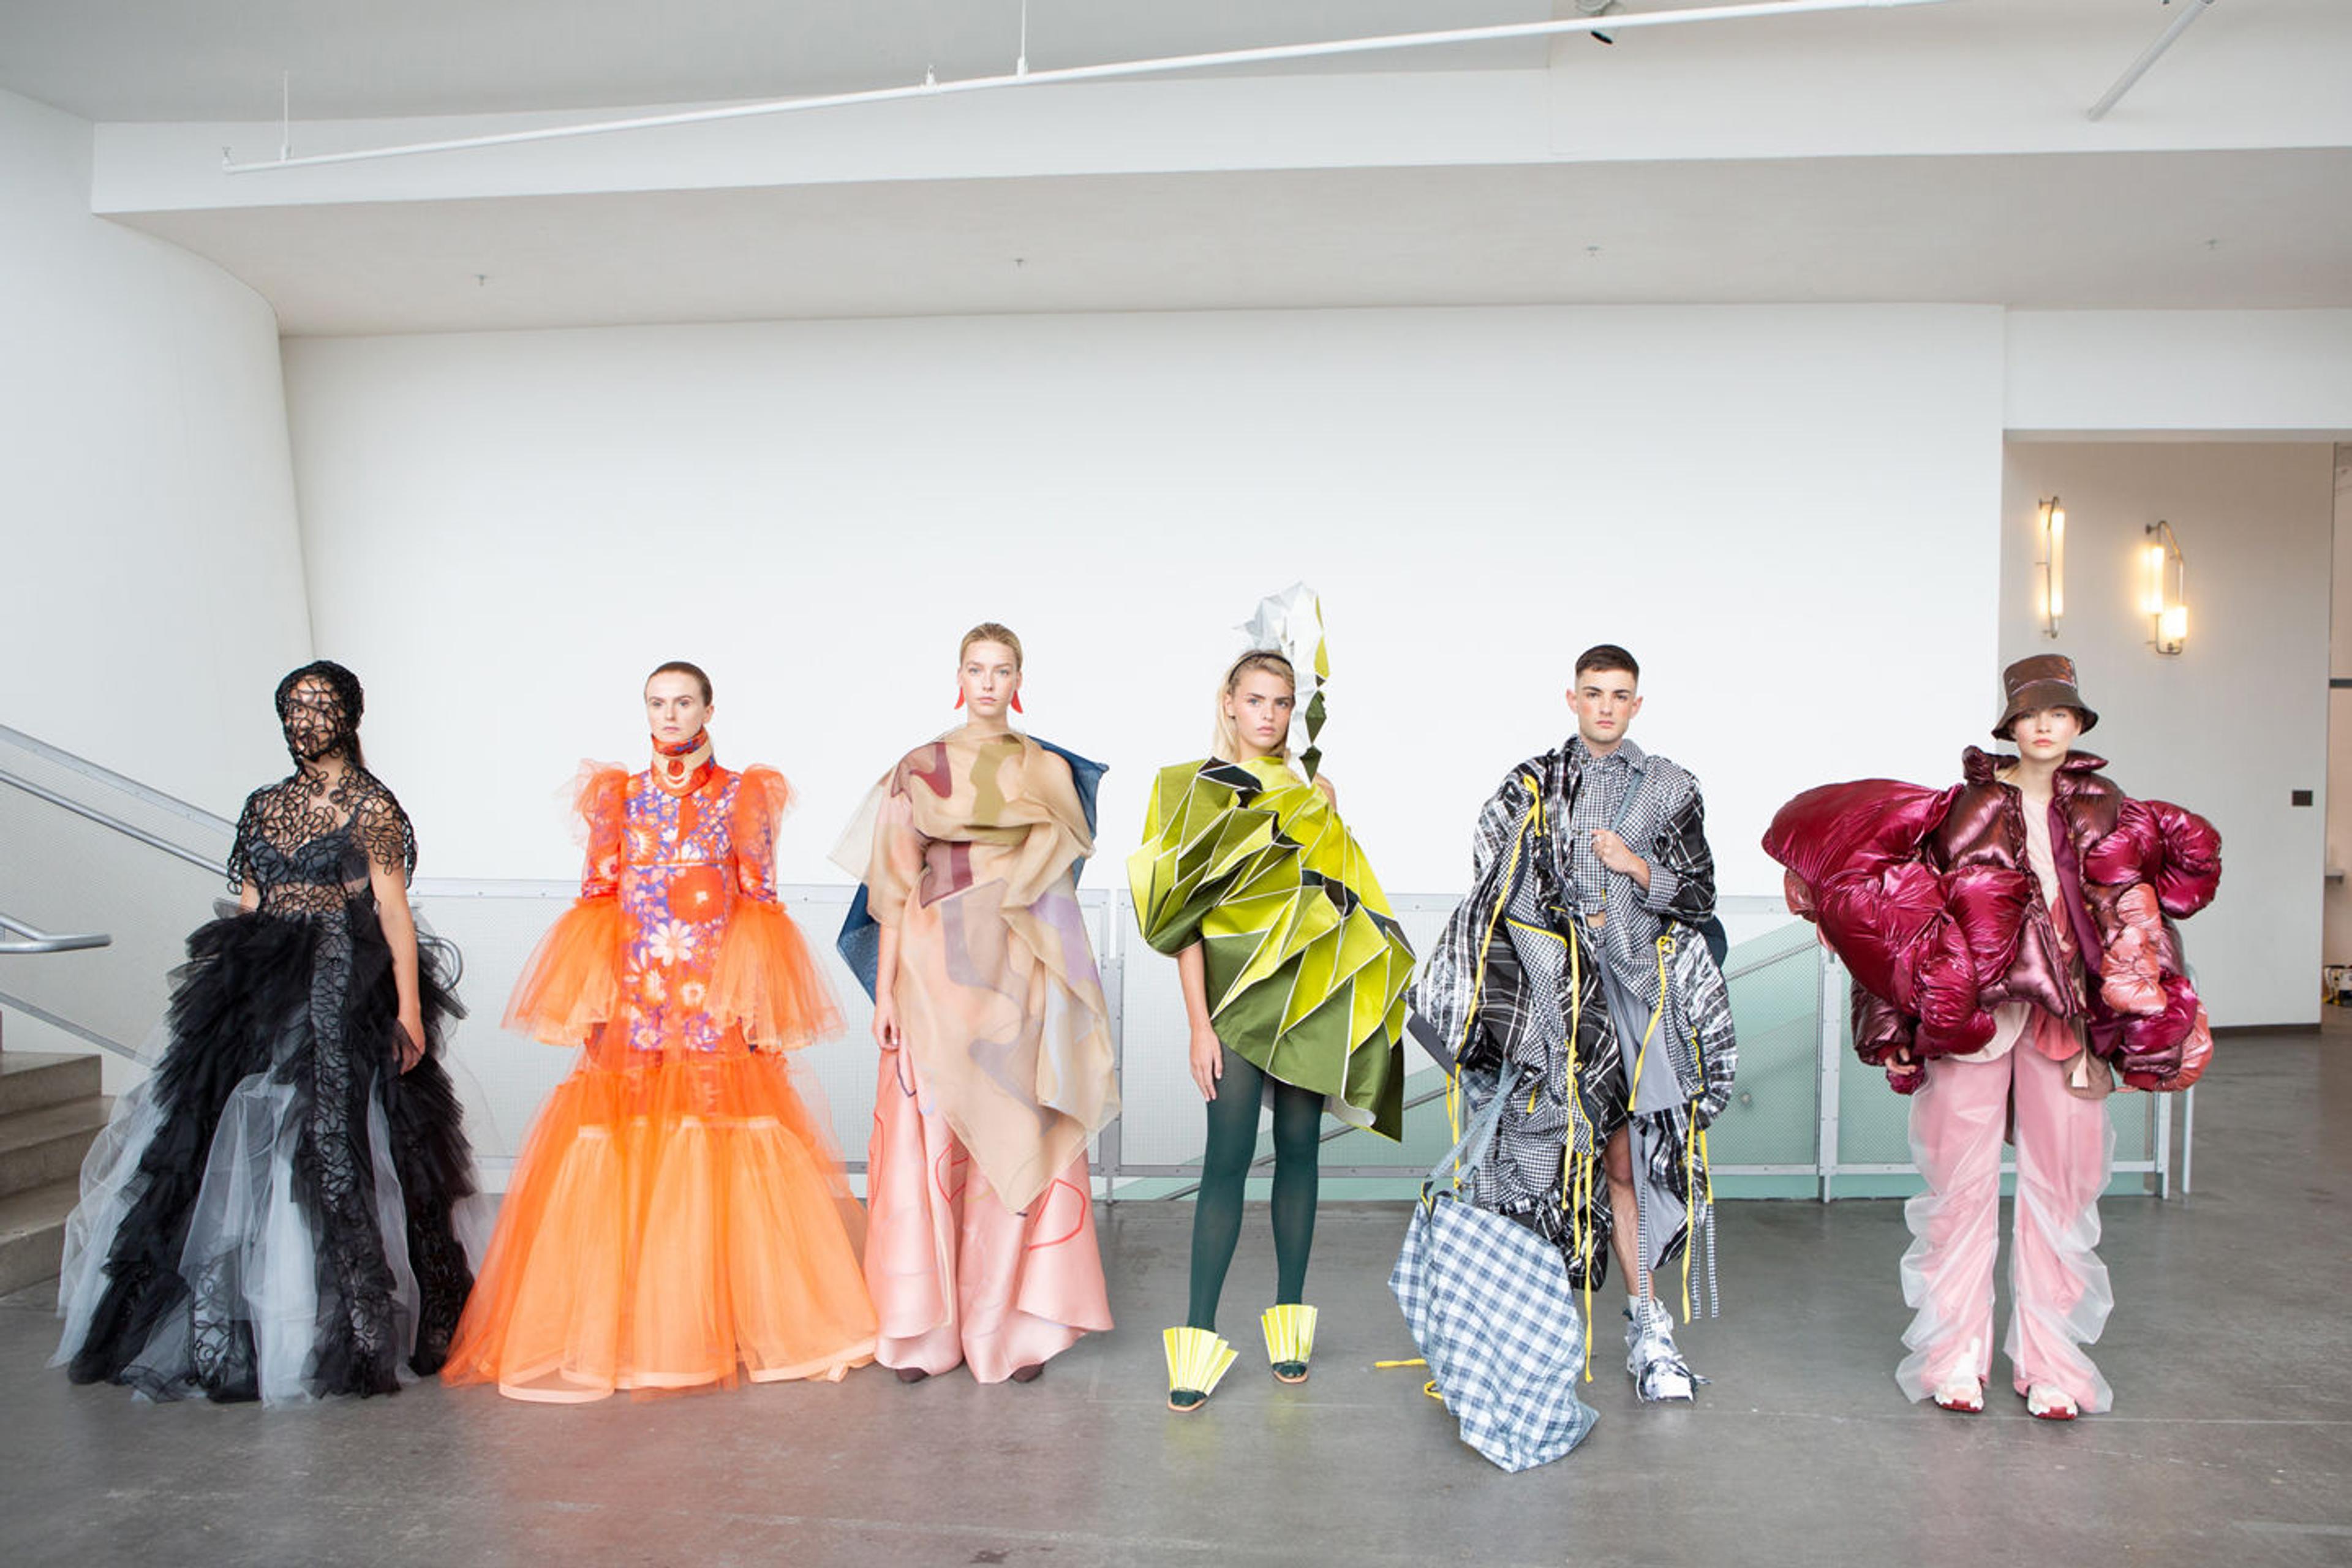 Six models stand in a row within a brightly lit room modeling experimental clothing designs ranging in bright neon colors and complex pleated volumes.